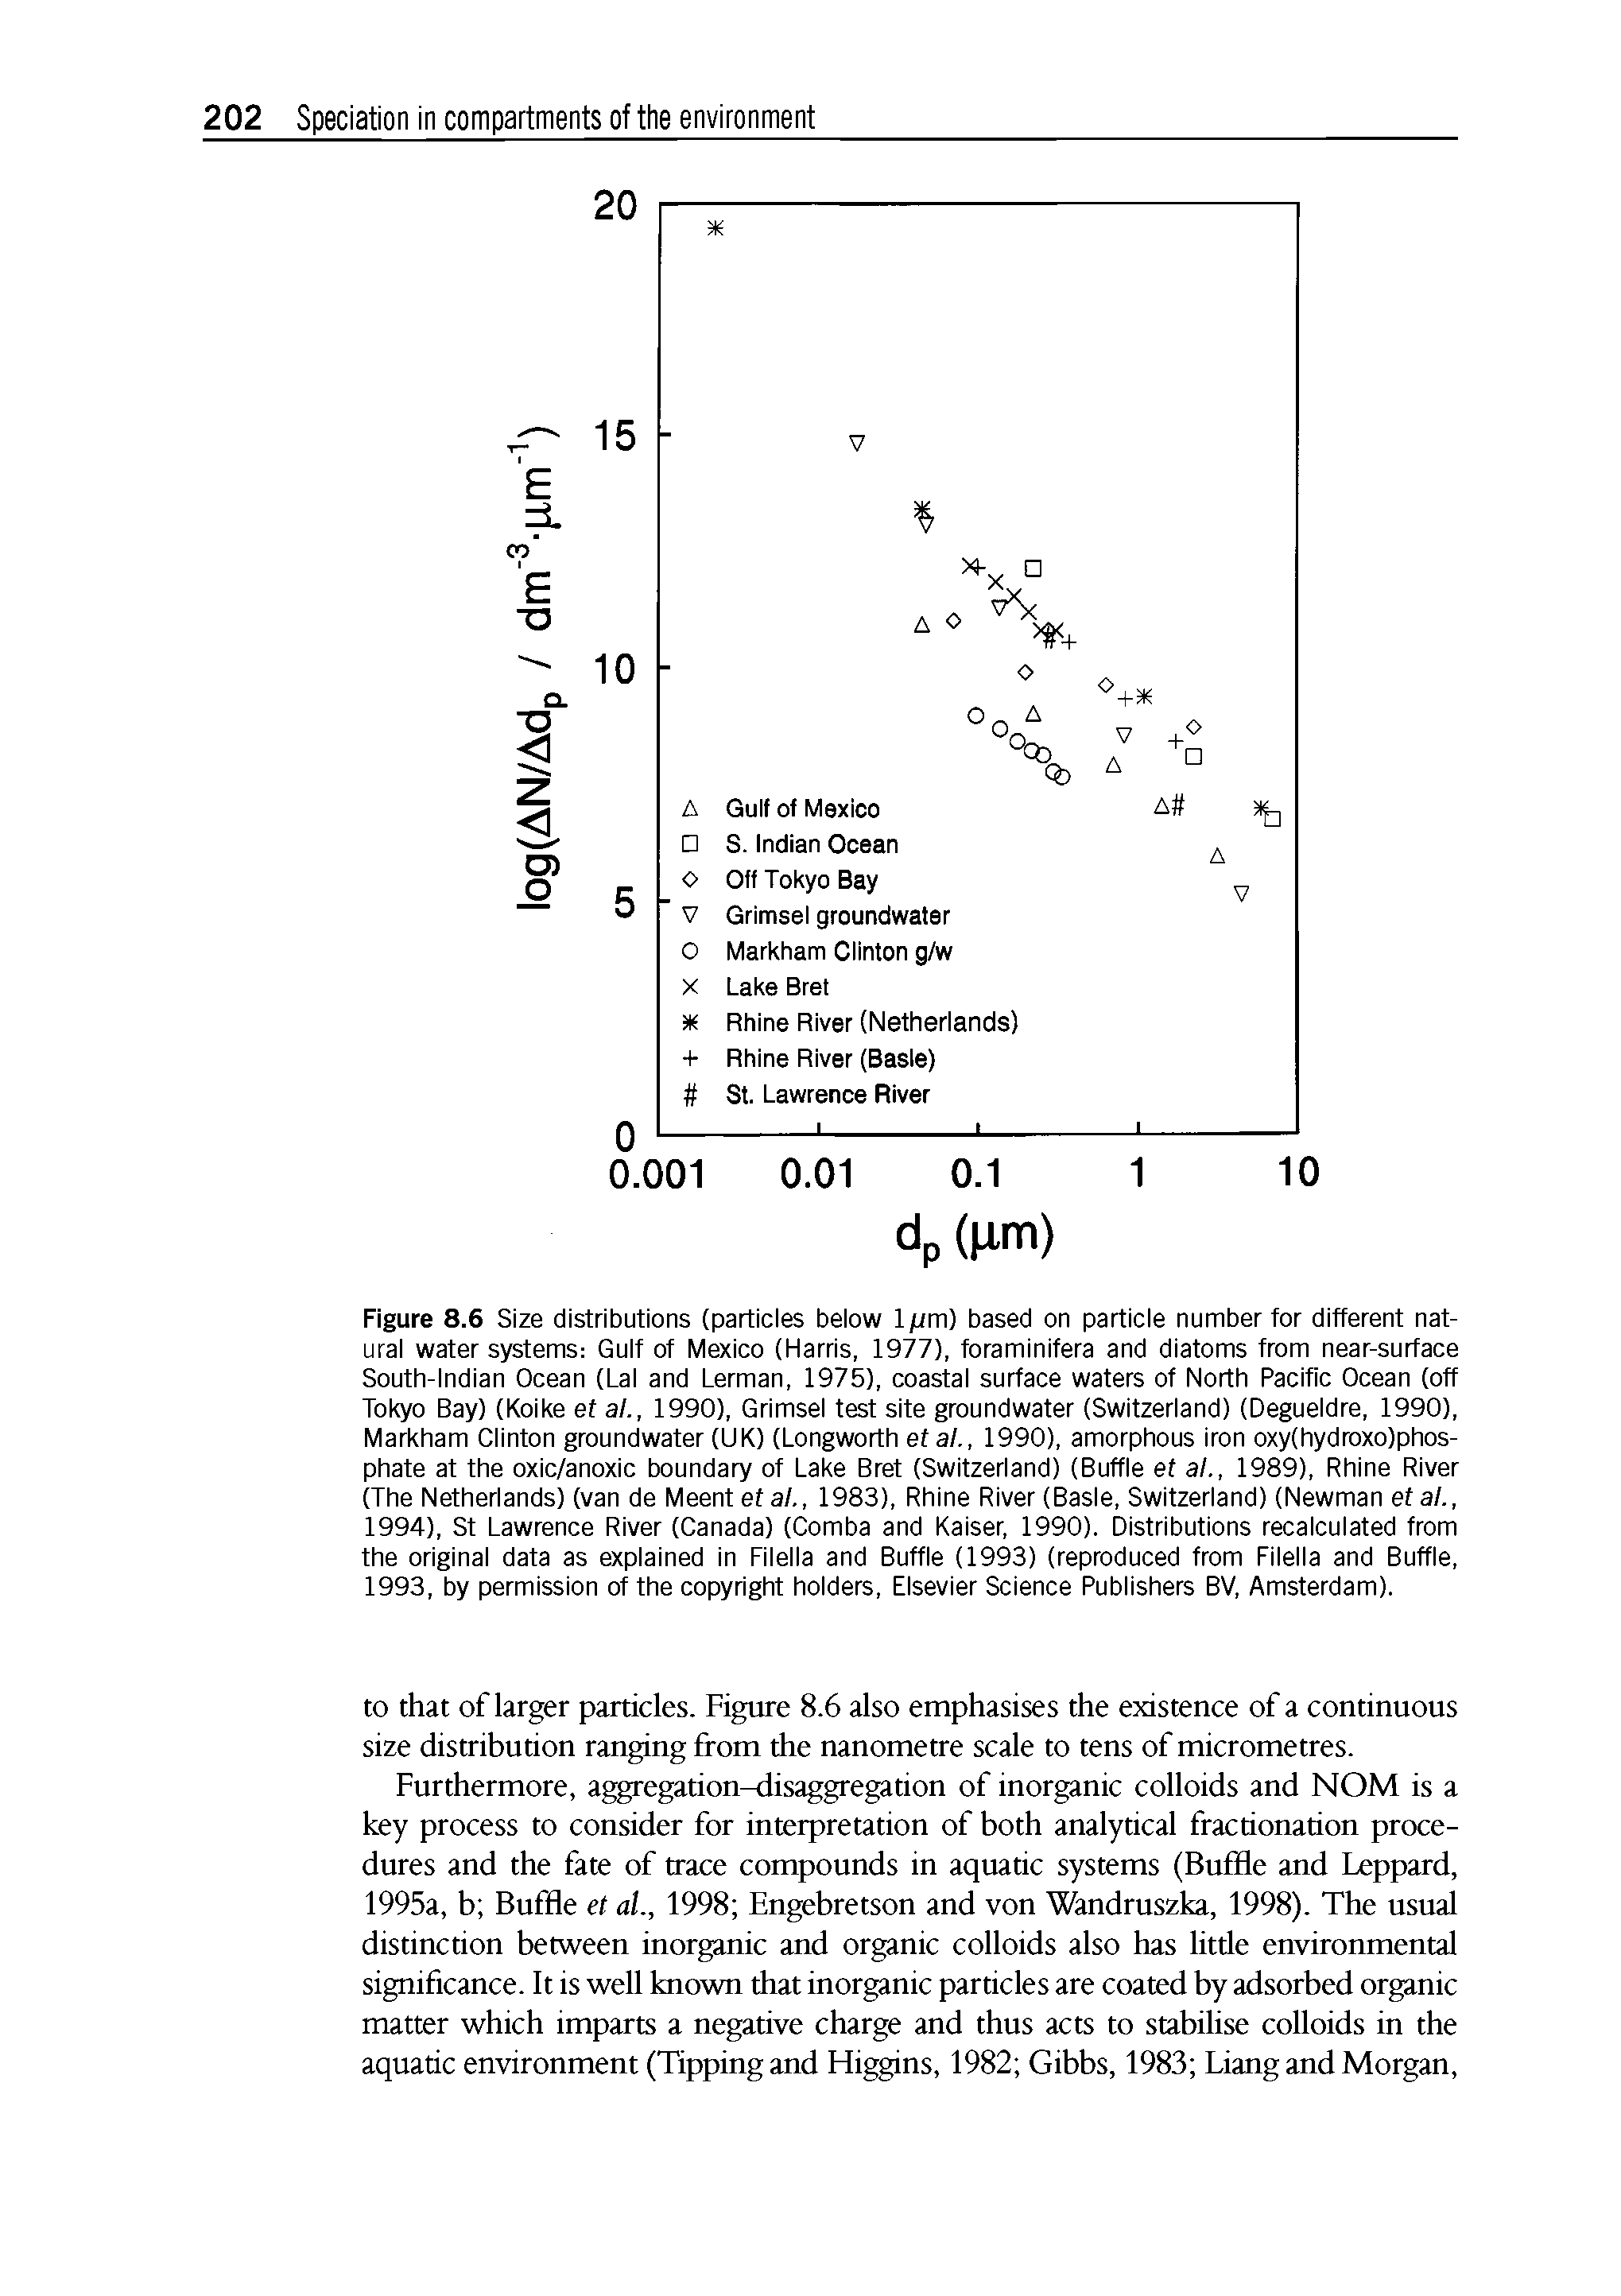 Figure 8.6 Size distributions (particles below lpm) based on particle number for different natural water systems Gulf of Mexico (Harris, 1977), foraminifera and diatoms from near-surface South-lndian Ocean (Lai and Lerman, 1975), coastal surface waters of North Pacific Ocean (off Tokyo Bay) (Koike et al., 1990), Grimsel test site groundwater (Switzerland) (Degueldre, 1990), Markham Clinton groundwater (UK) (Longworth et al., 1990), amorphous iron oxy(hydroxo)phos-phate at the oxic/anoxic boundary of Lake Bret (Switzerland) (Buffle et al., 1989), Rhine River (The Netherlands) (van de Meentef al., 1983), Rhine River (Basle, Switzerland) (Newman etal., 1994), St Lawrence River (Canada) (Comba and Kaiser, 1990). Distributions recalculated from the original data as explained in Filella and Buffle (1993) (reproduced from Filella and Buffle, 1993, by permission of the copyright holders, Elsevier Science Publishers BV, Amsterdam).